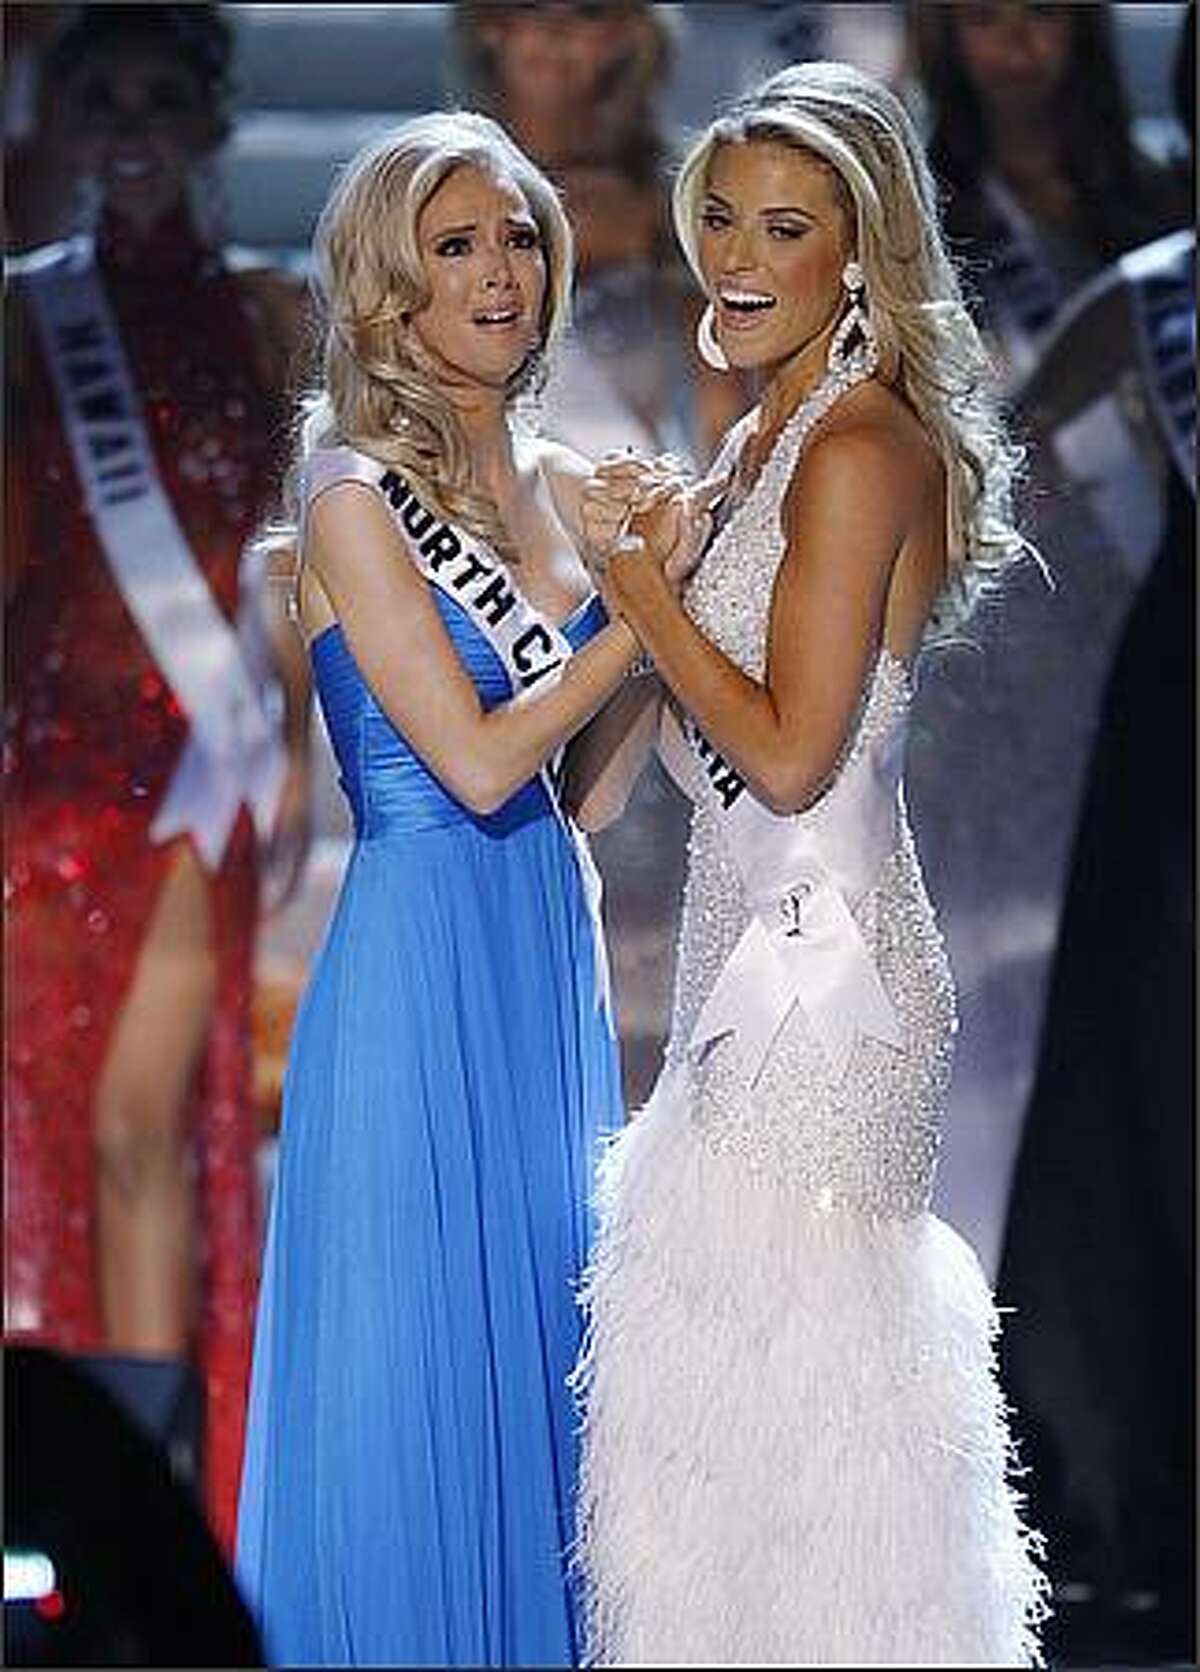 Miss North Carolina Kristen Dalton, left, and first runner-up Miss California Carrie Prejean, from San Diego, react after Dalton is announced Miss USA on Sunday in Las Vegas. (AP Photo/Eric Jamison)